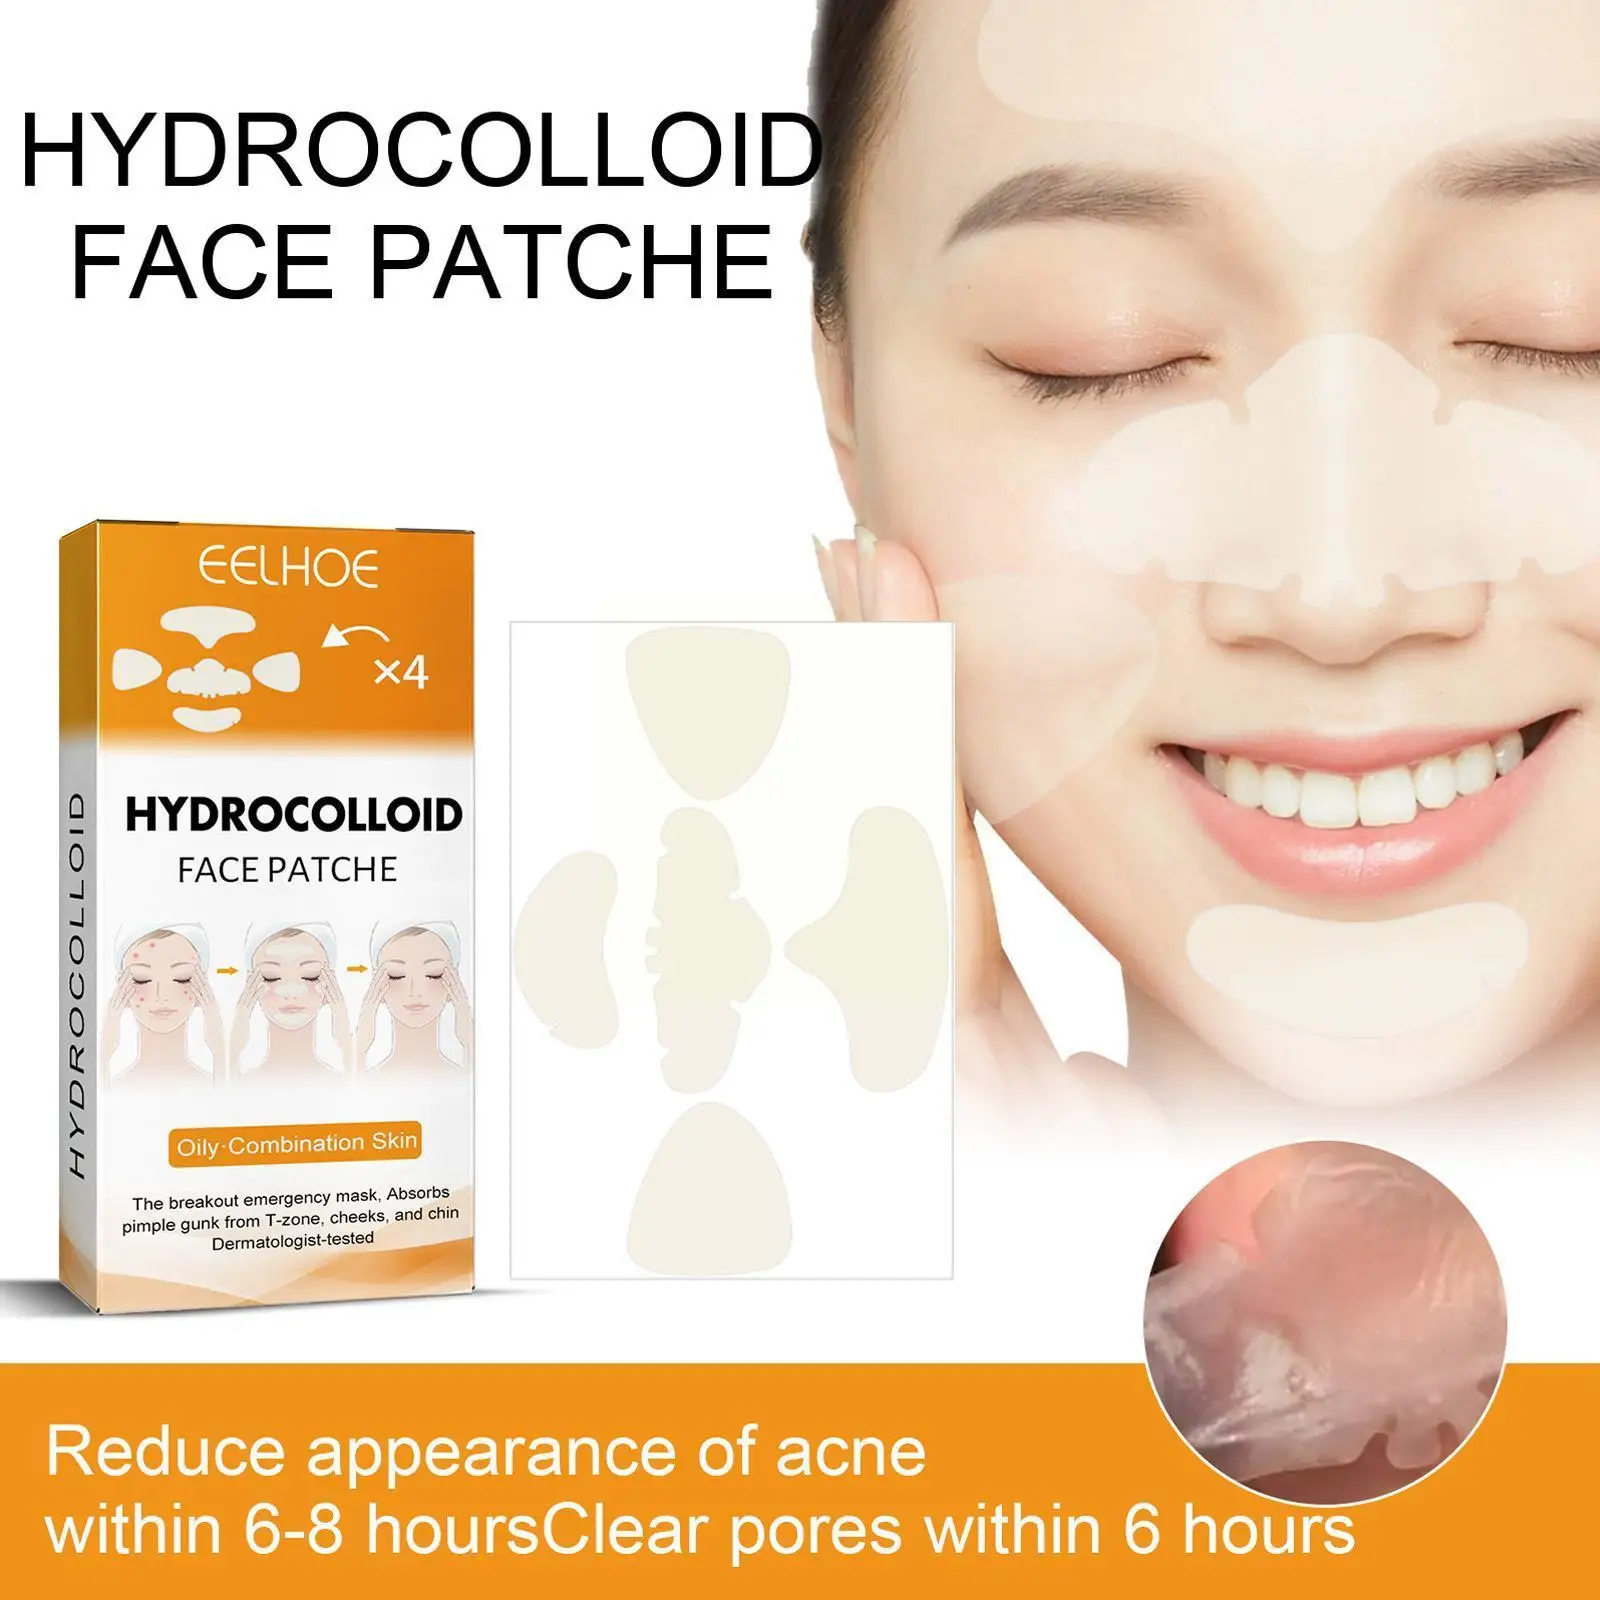 

Hydrocolloid Mask Face Patche For Acne Pimple Treatments Pimple Patches For Zit Breakouts On Nose Chin Forehead Cheeks D8K1